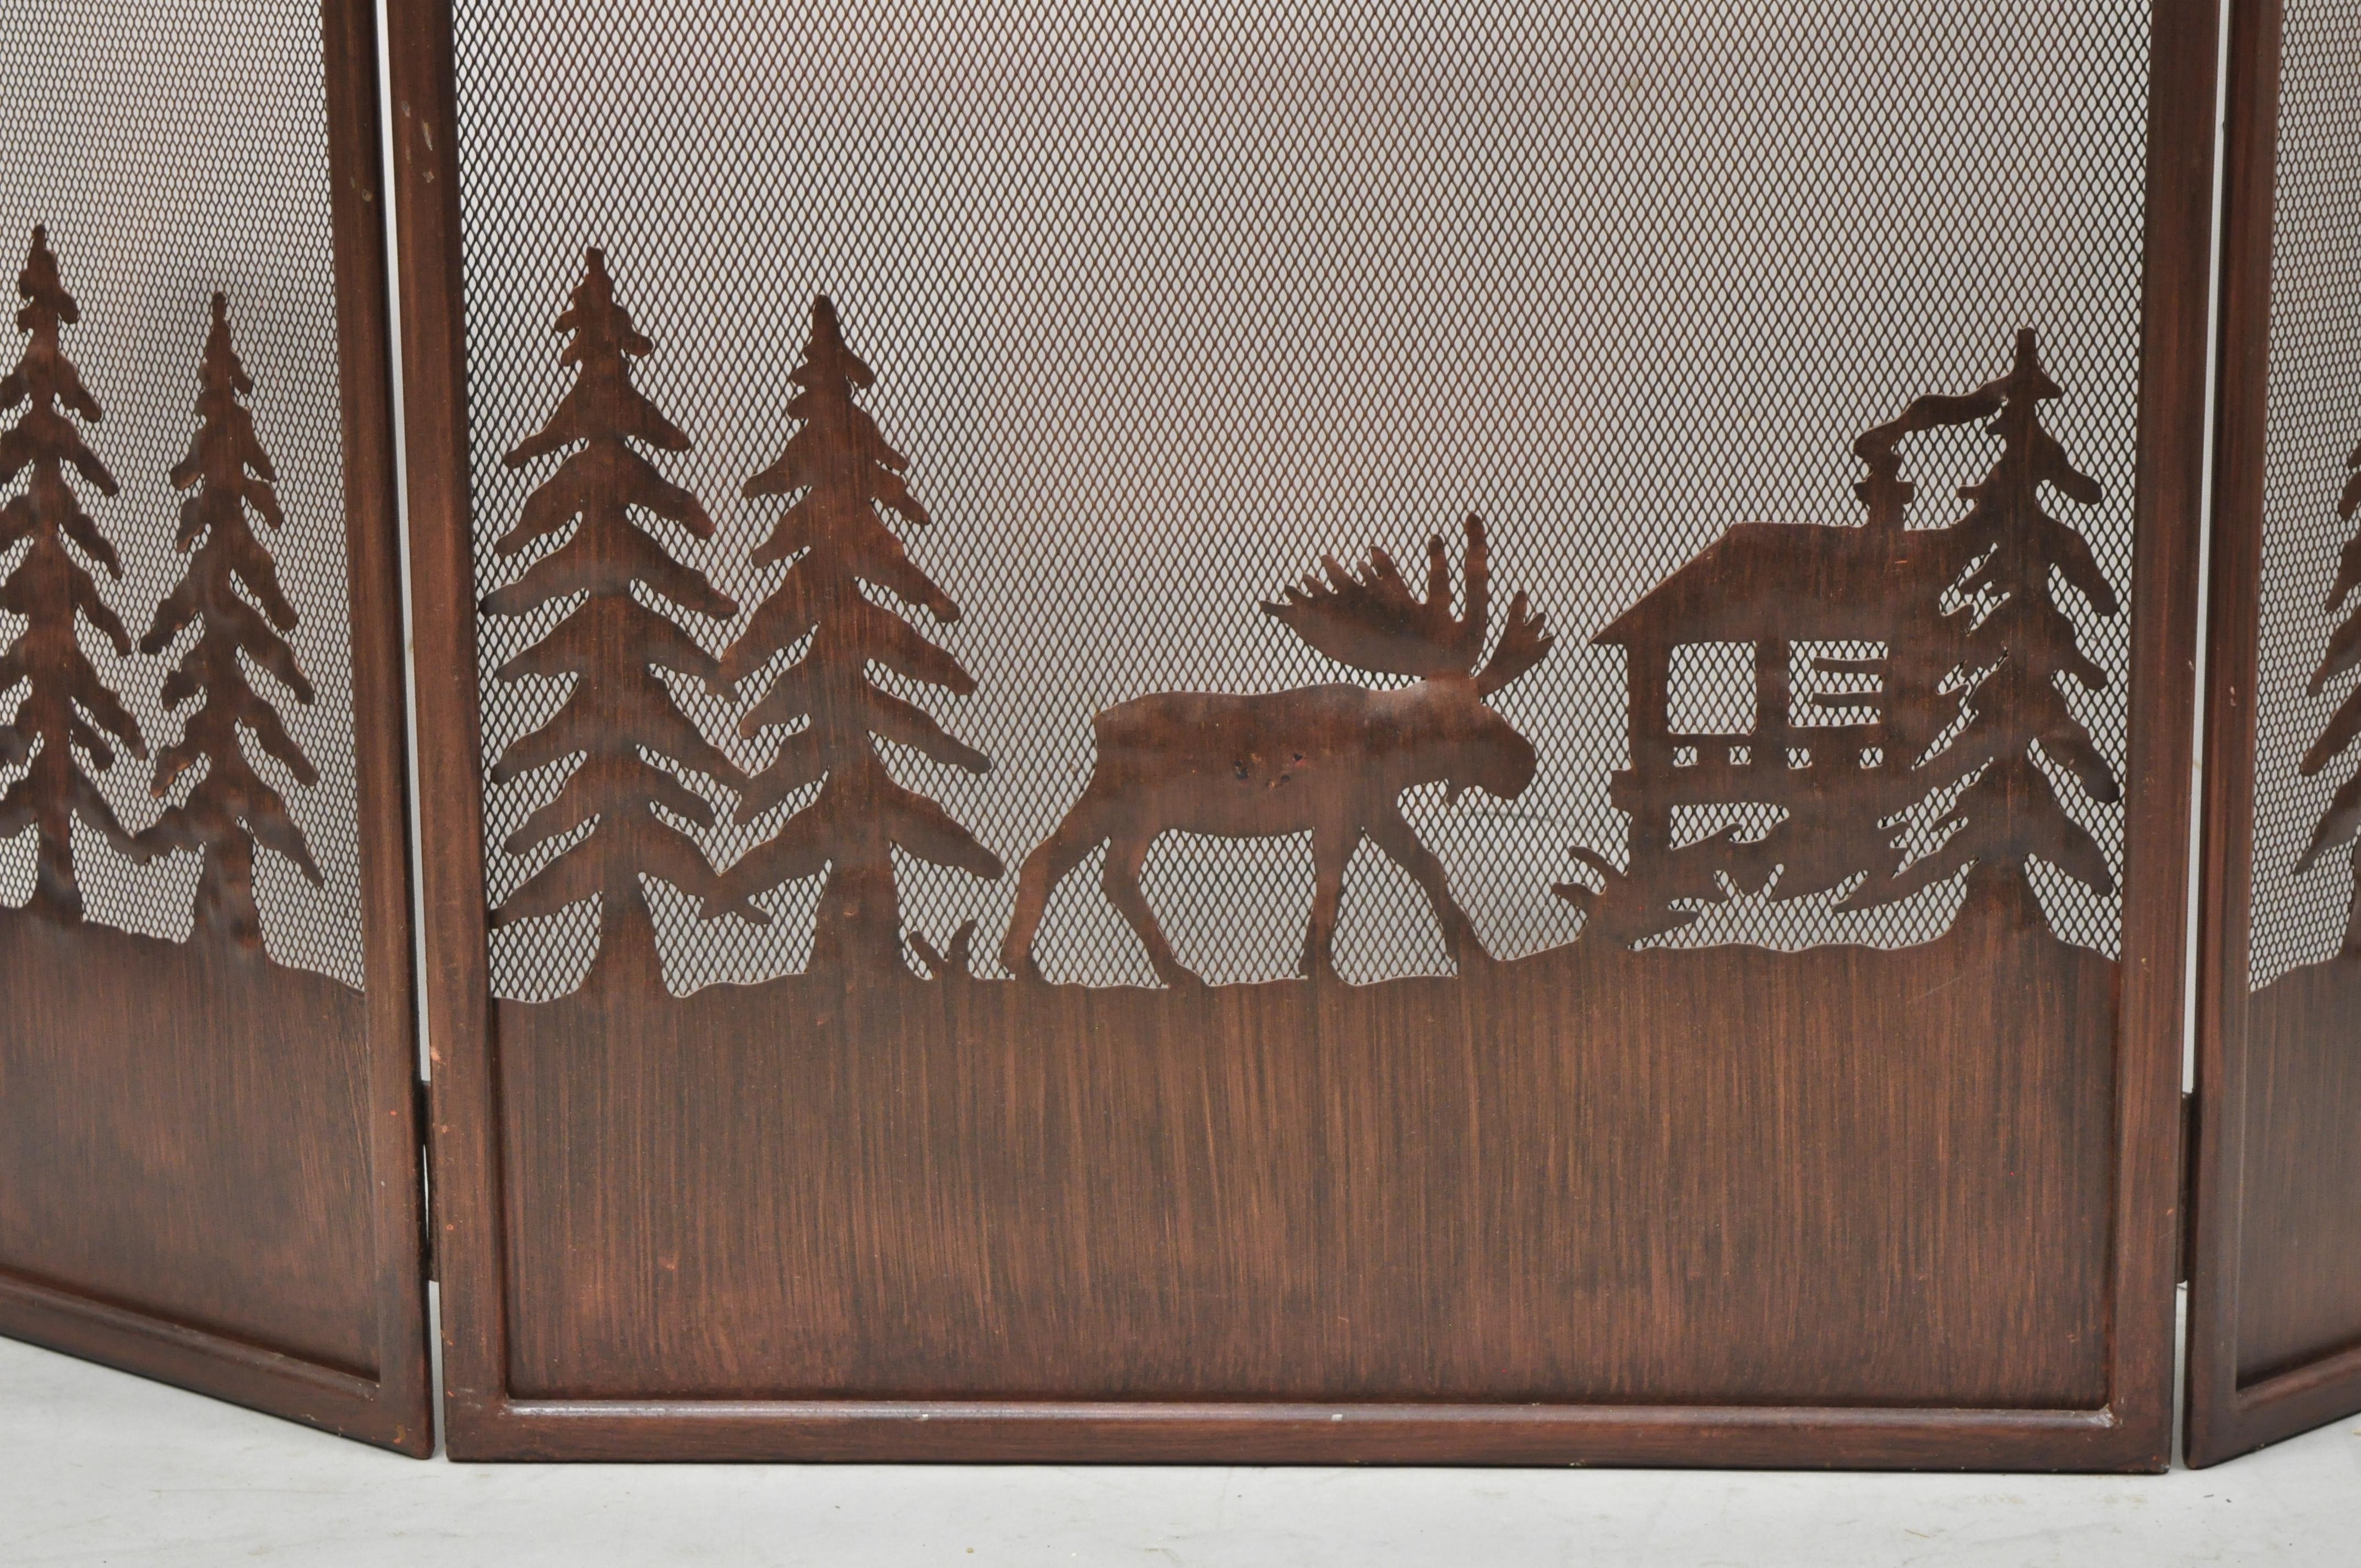 Moose wilderness log cabin rustic iron folding fireplace mantle screen. Item features 3 section folding screen with wilderness scenes of tall trees, a moose, and log cabin. Age: Late 20th century. Measurements: 30